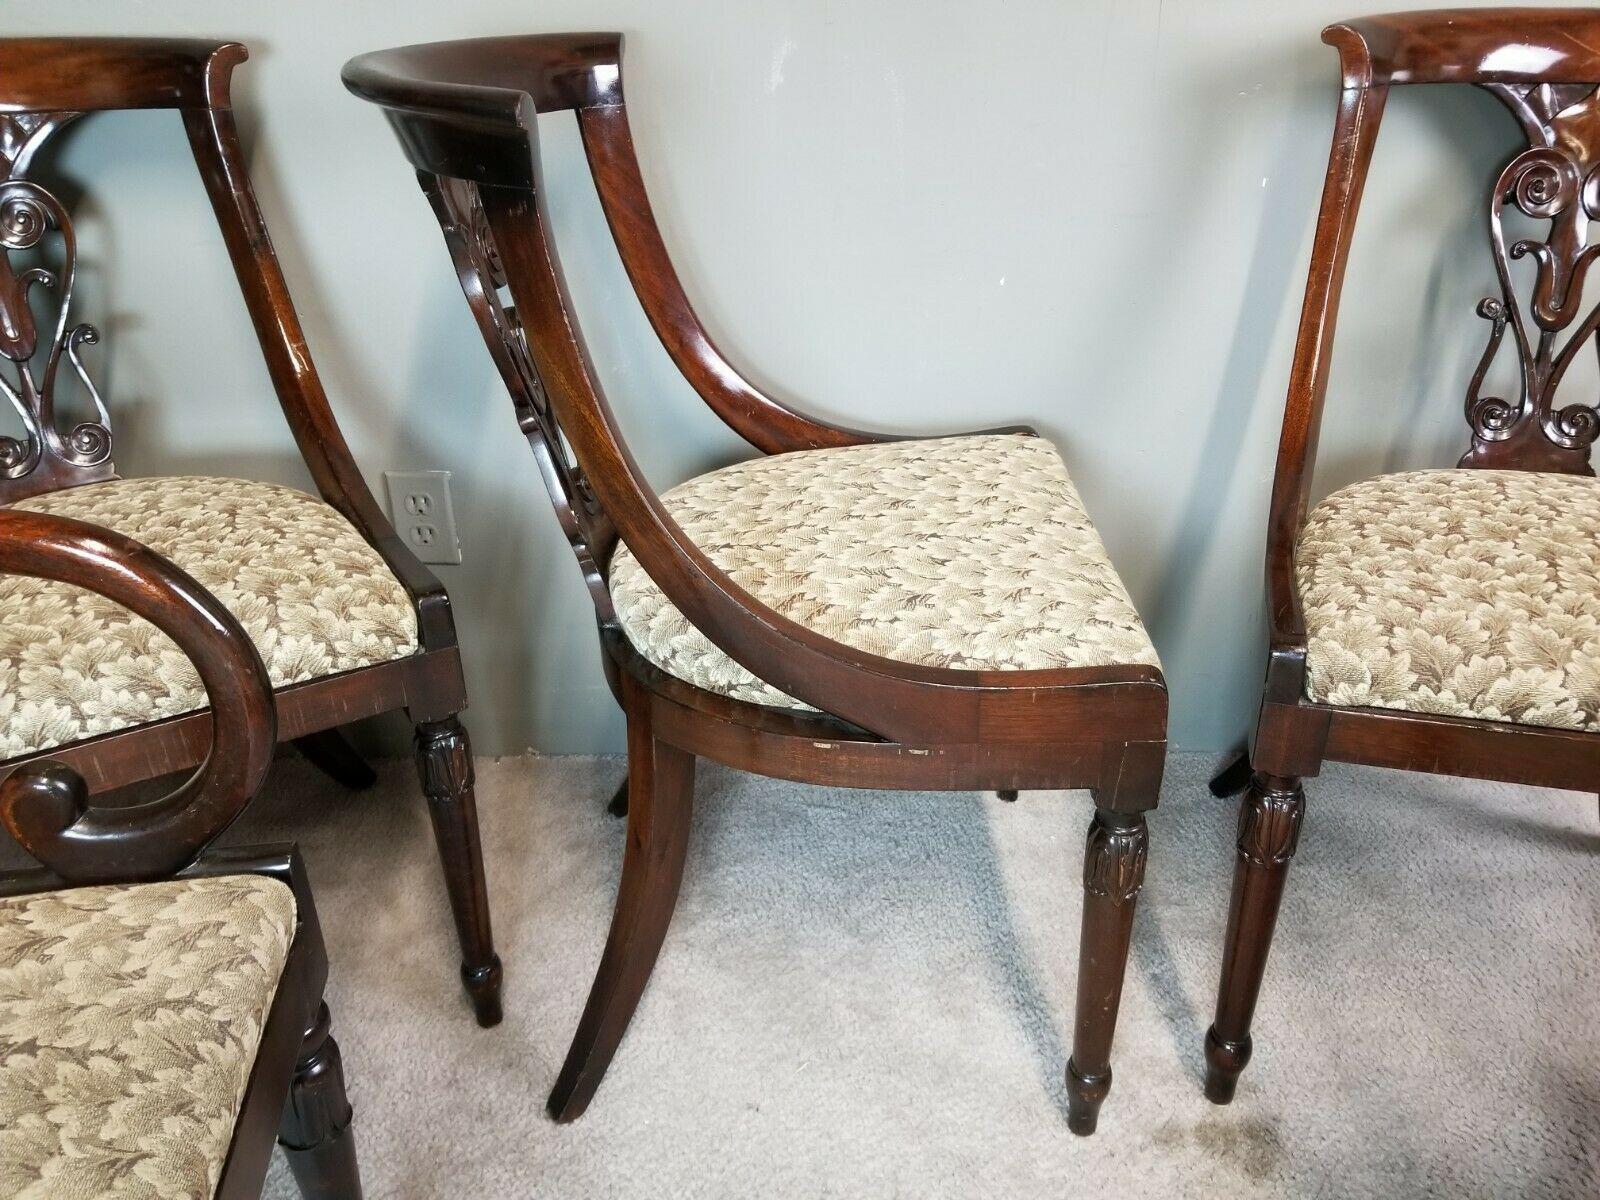 19th Century Antique English Regency Solid Mahogany Scroll Arm Dining Chairs, Set of 5 For Sale